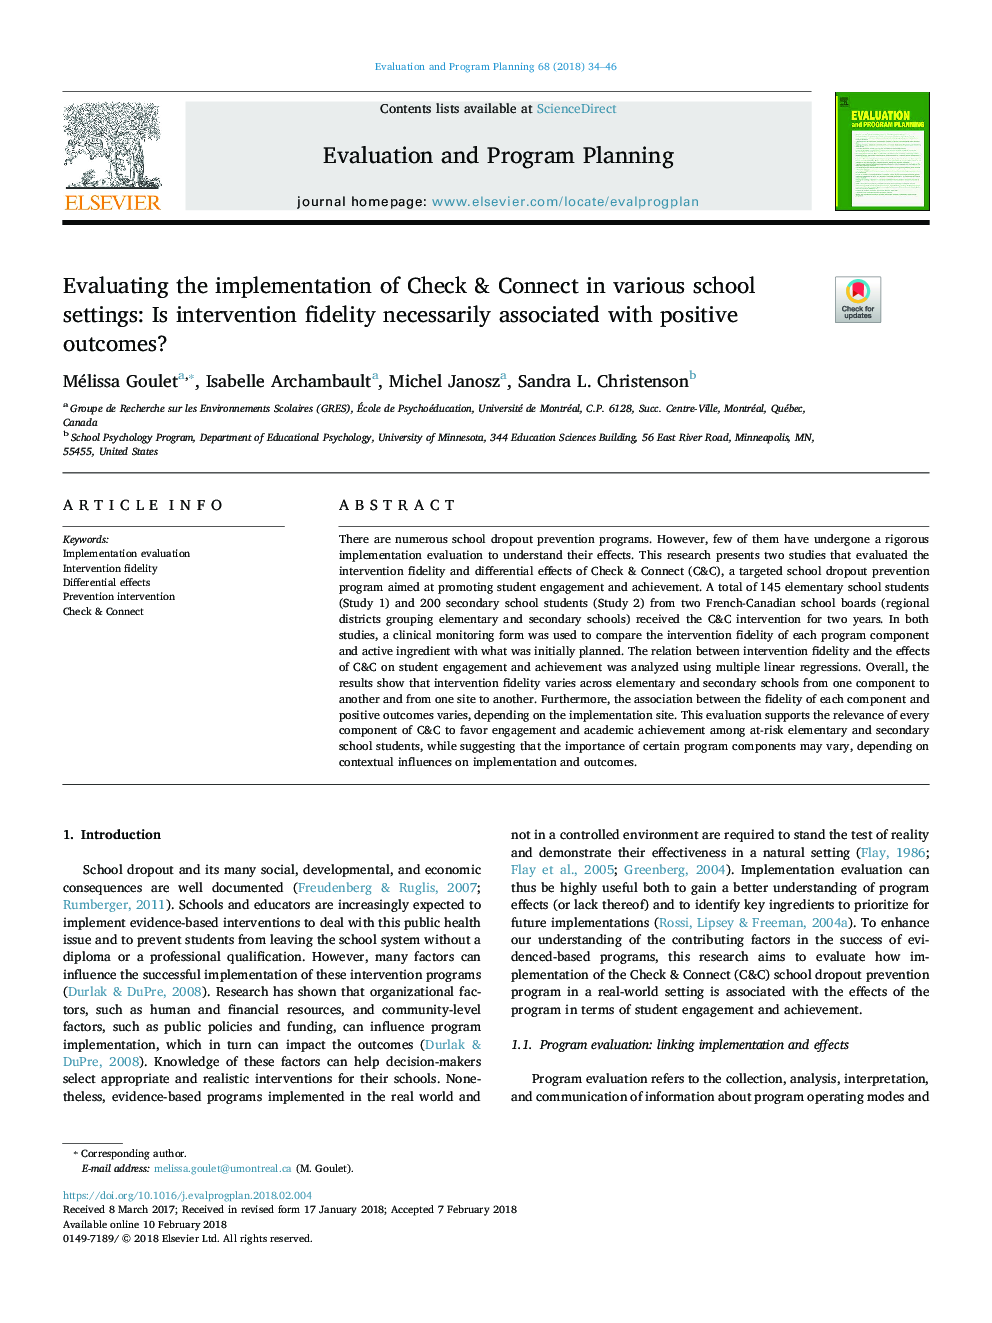 Evaluating the implementation of Check & Connect in various school settings: Is intervention fidelity necessarily associated with positive outcomes?